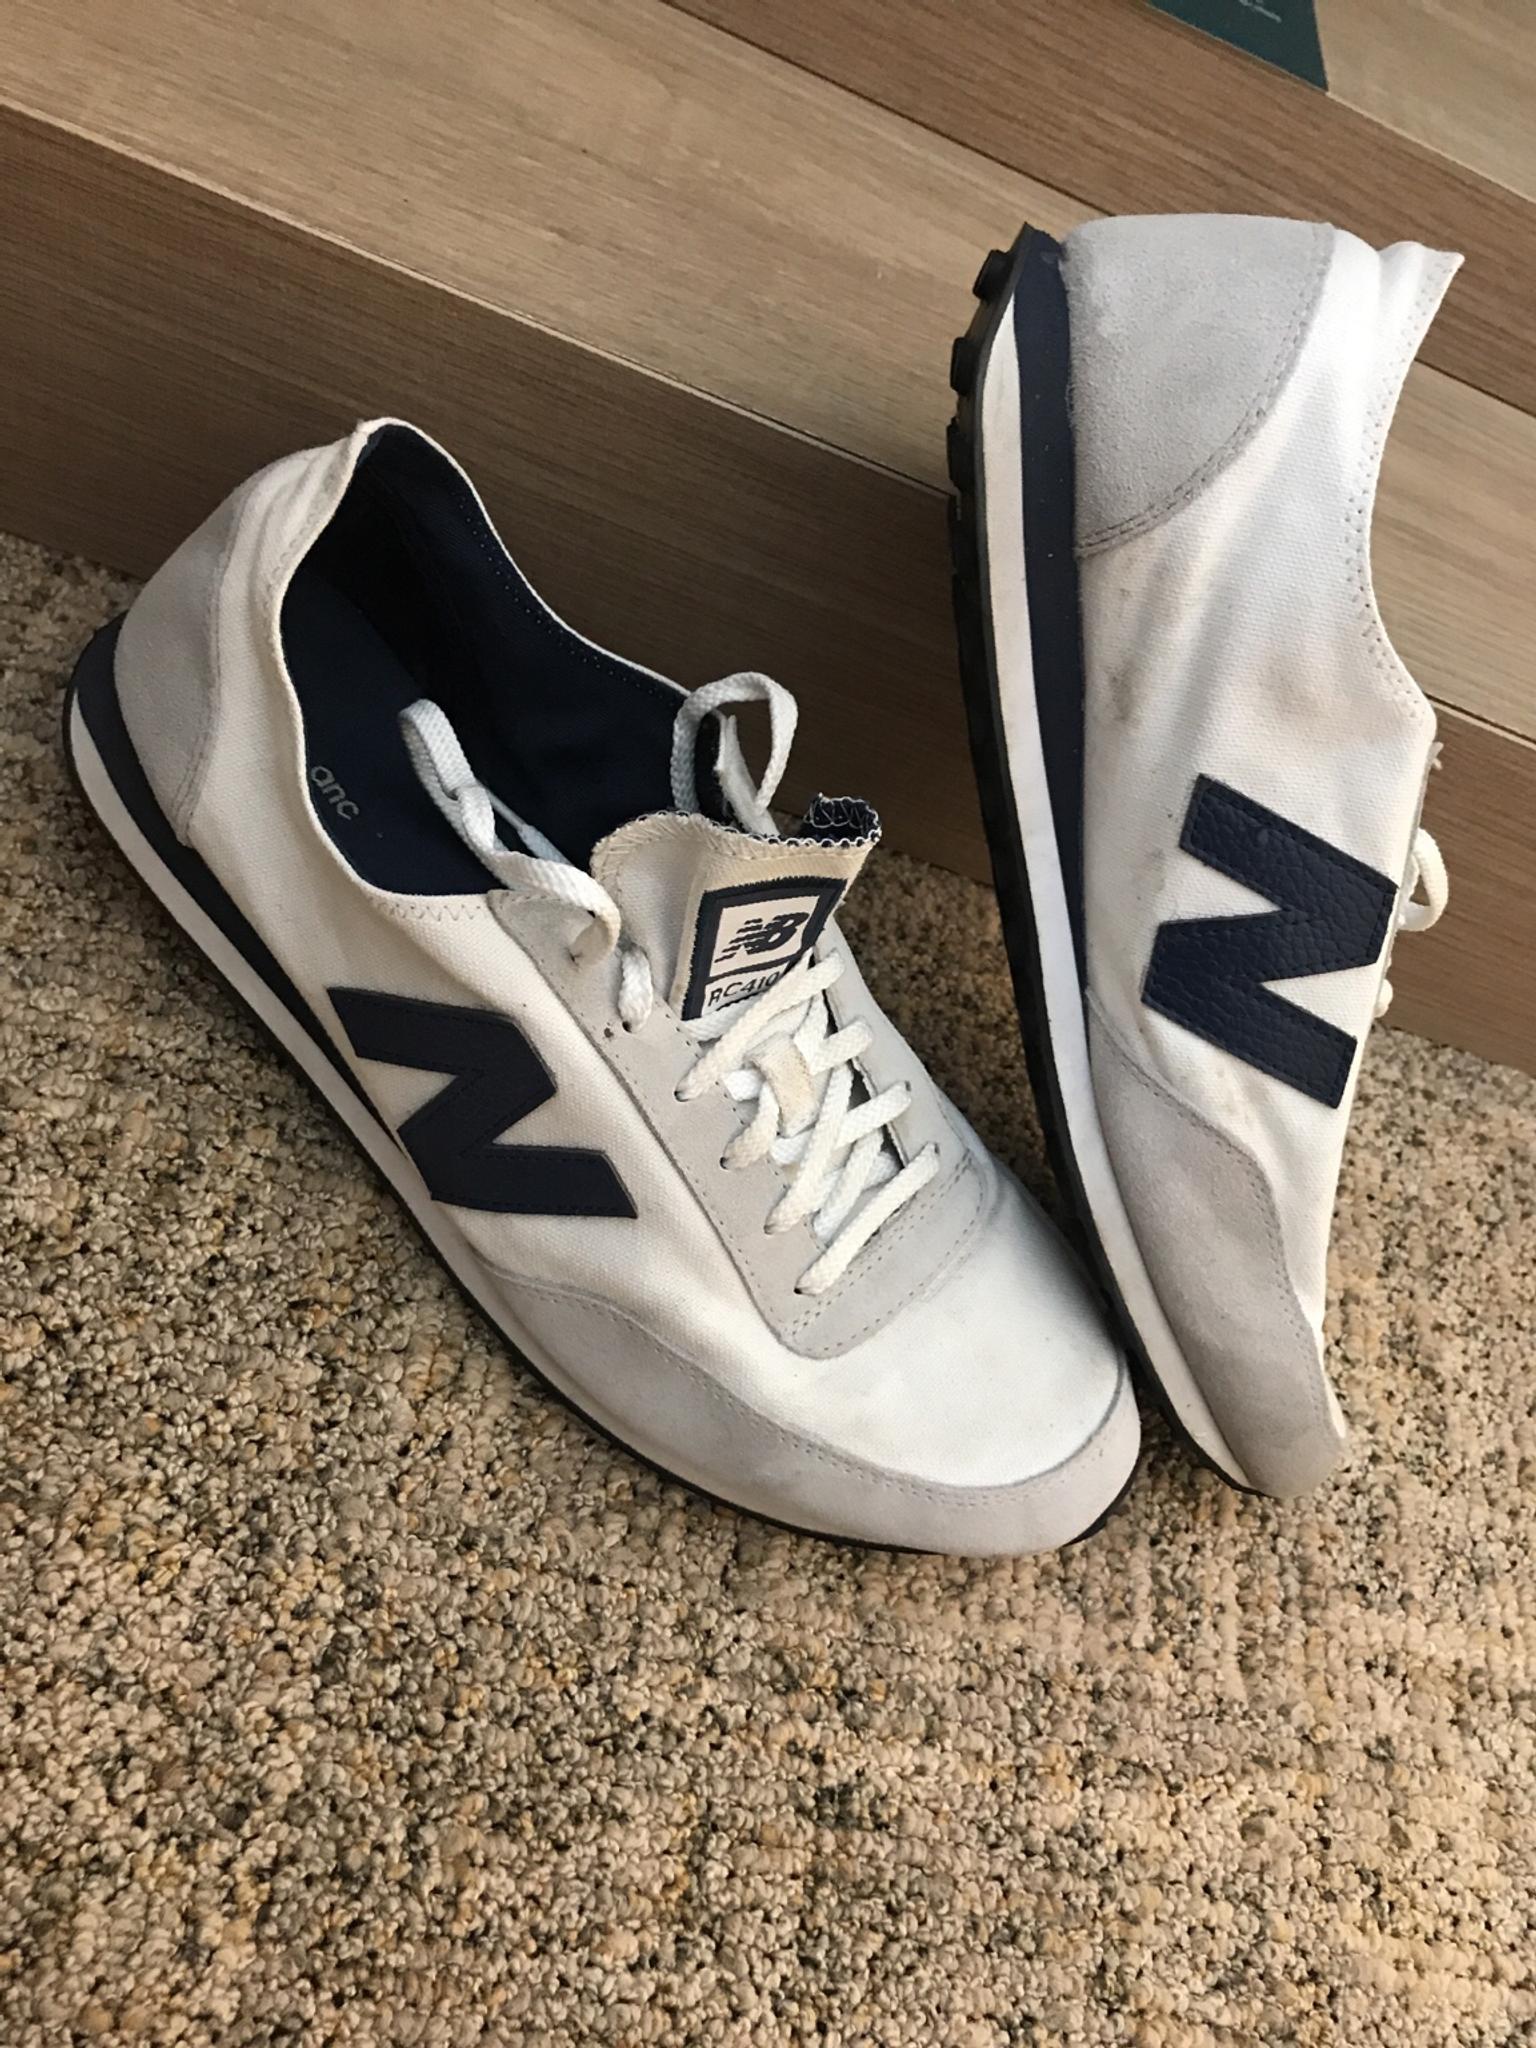 New Balance RC 410 Gr.: 45,5 UK 11 in 8020 Graz for €79.00 for sale | Shpock